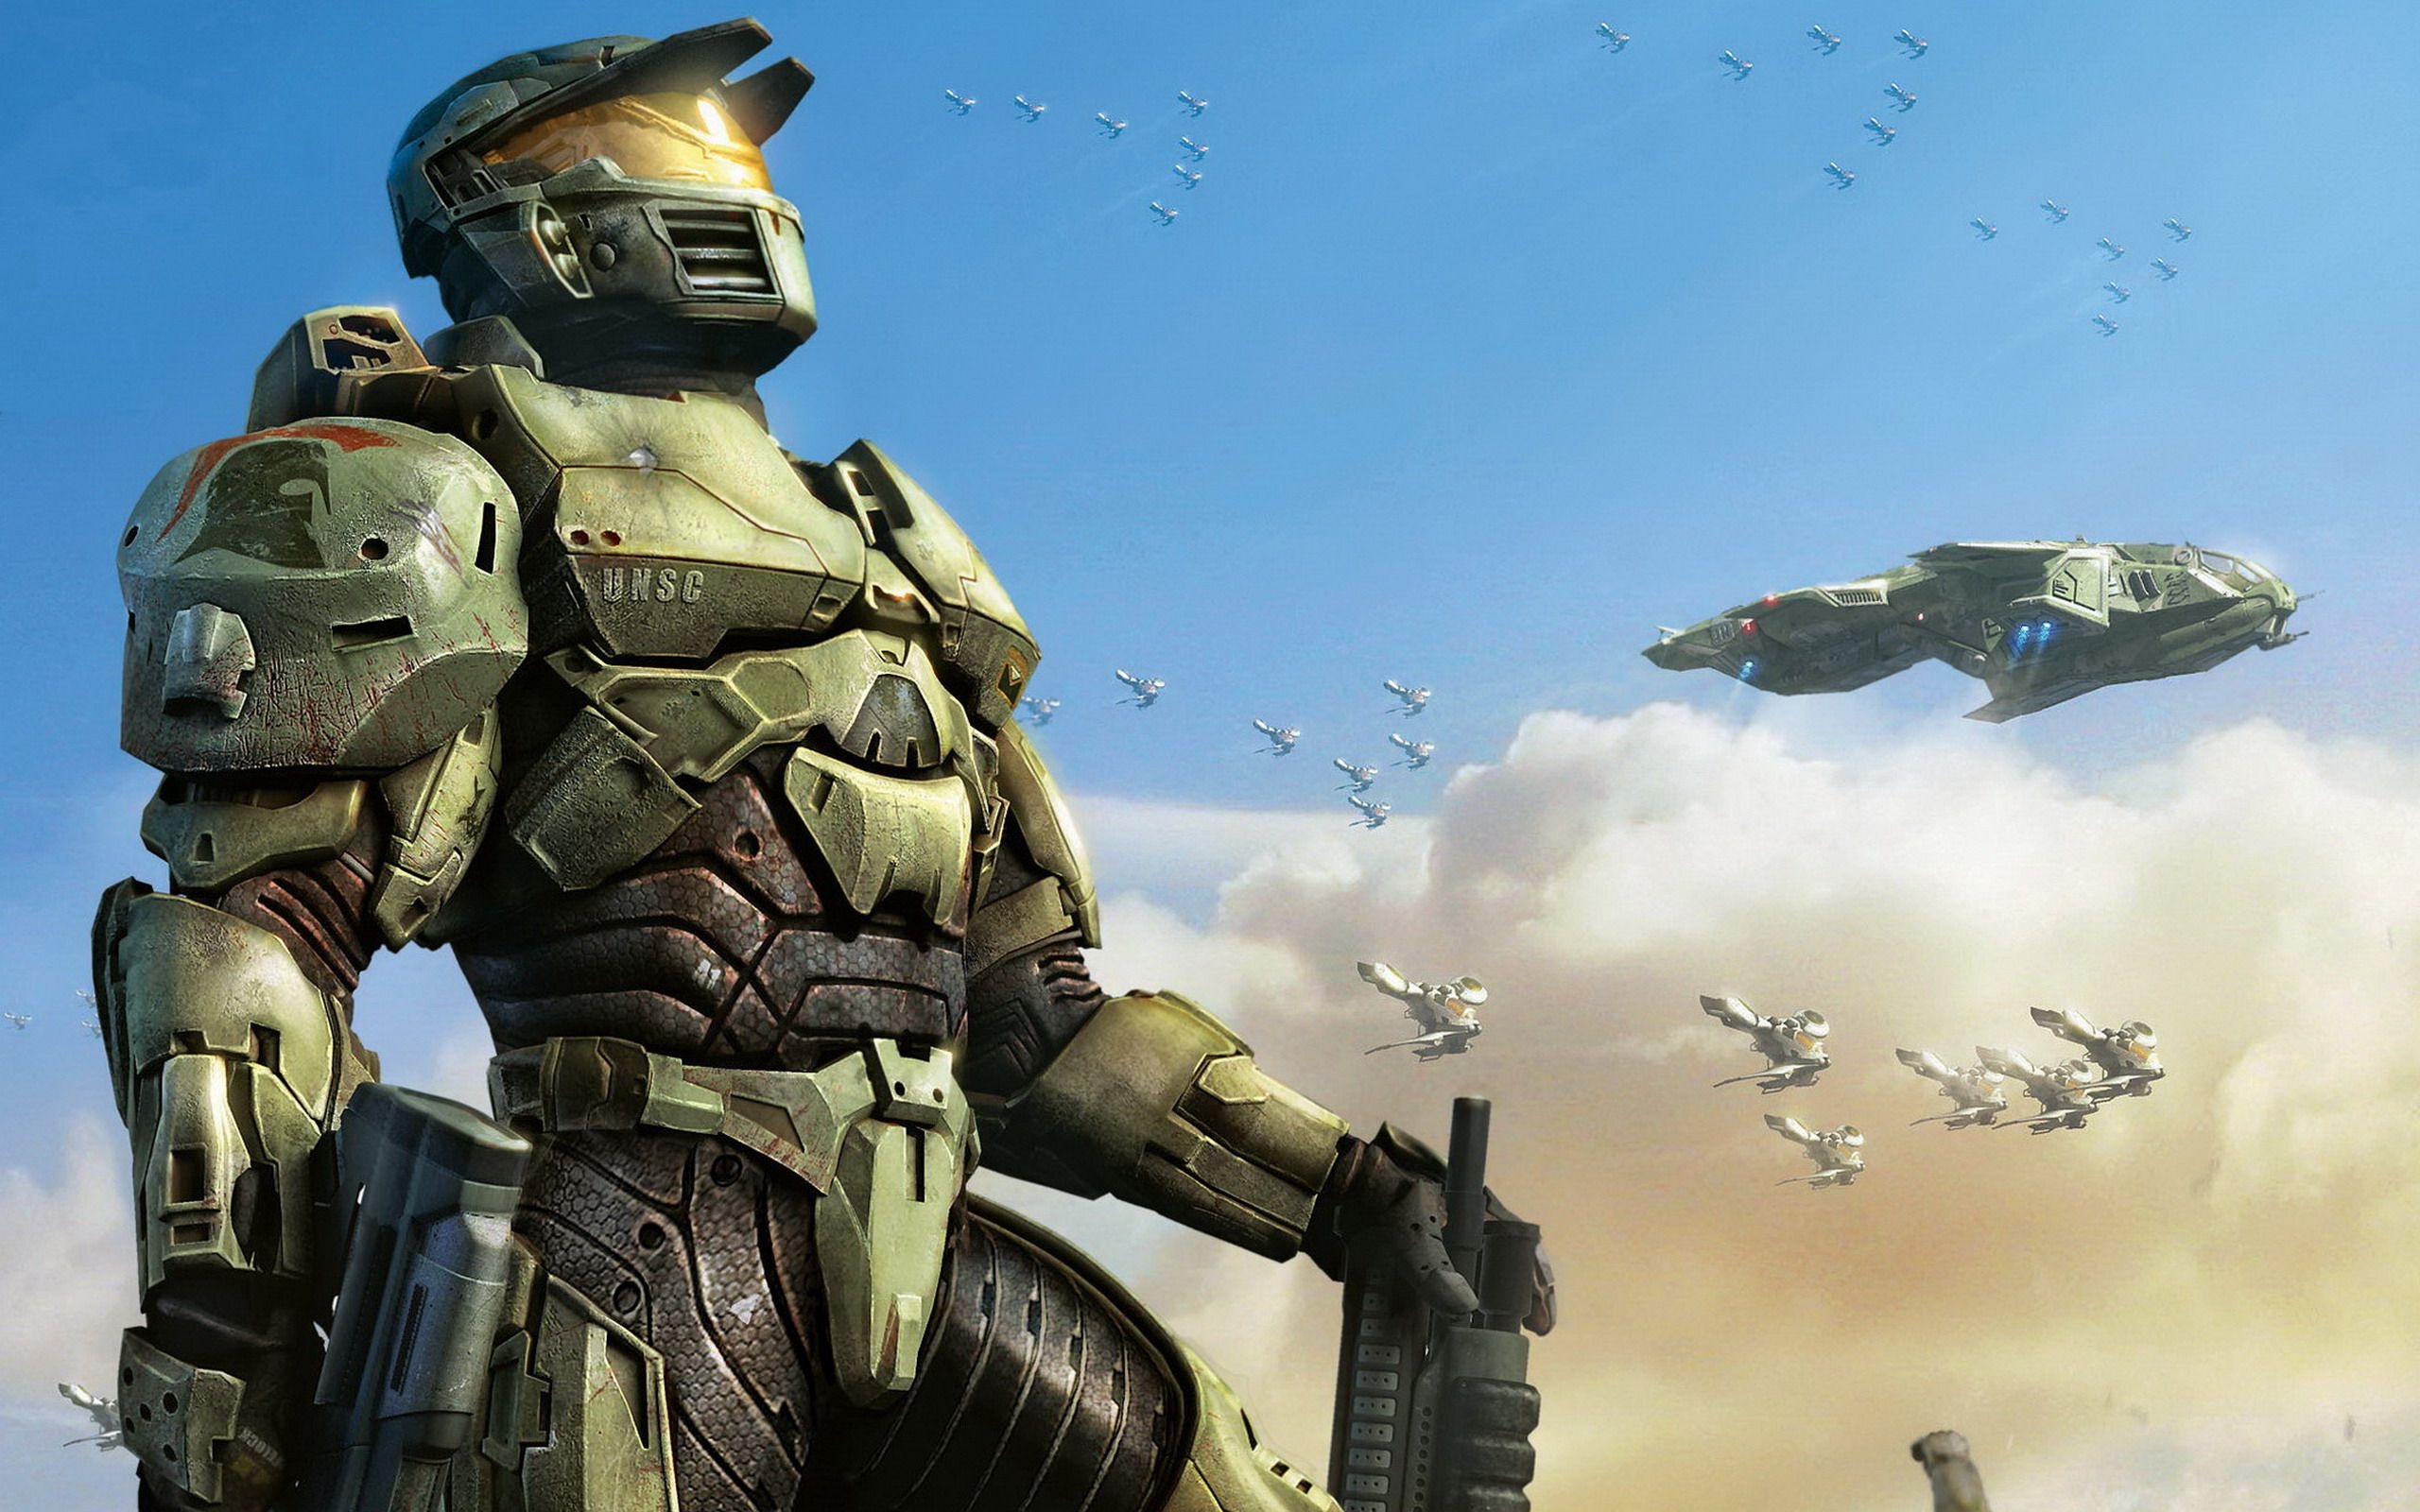 PC Master Chief wallpapers, Cool designs, Gaming wallpapers, Halo franchise, 2560x1600 HD Desktop